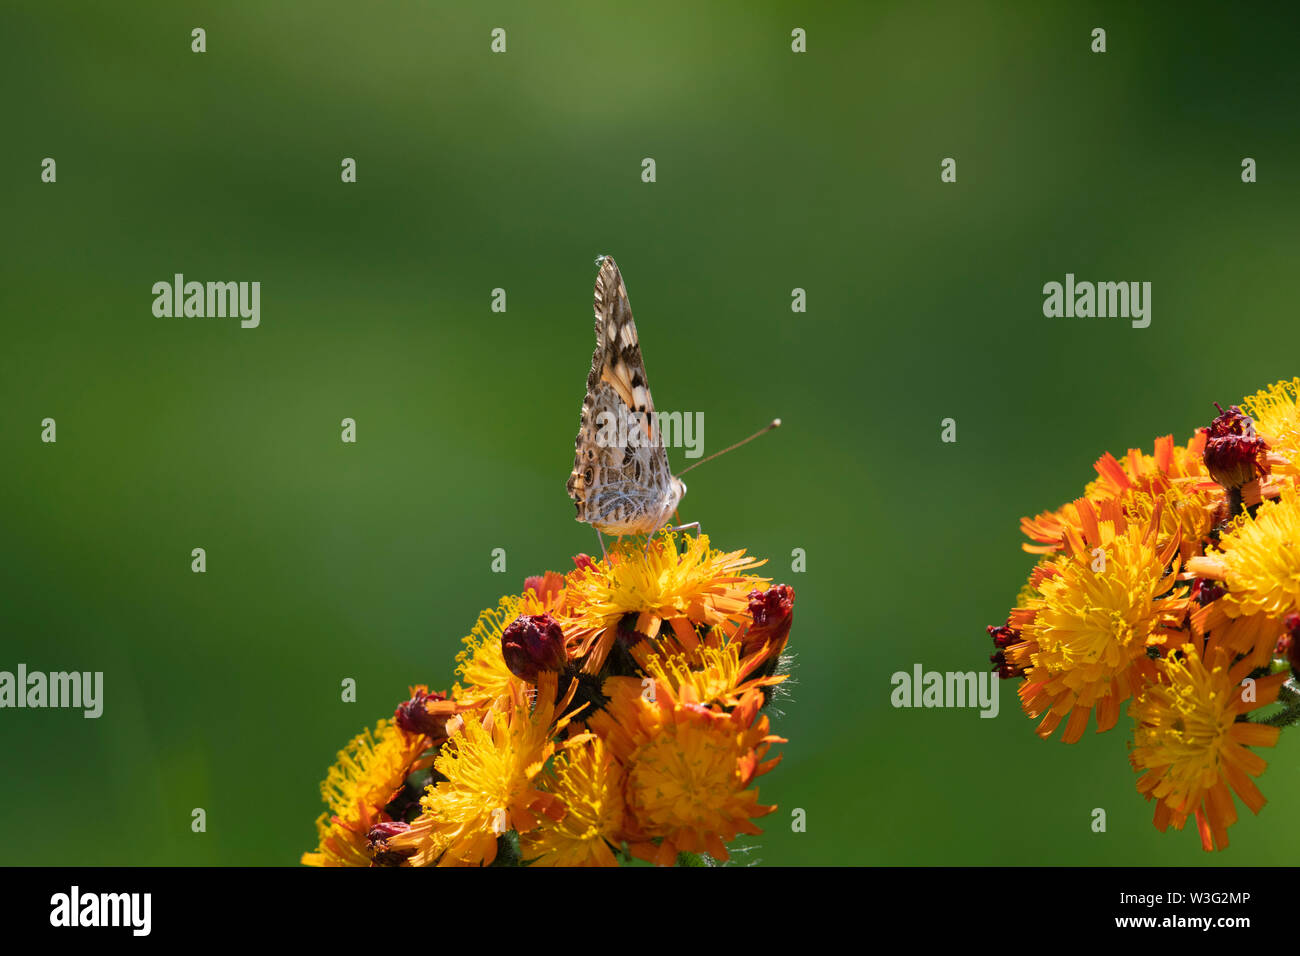 A Painted Lady Butterfly (Vanessa Cardui) Sitting on the Wildflower 'Fox and Cubs' (Hieracium Aurantiacum) with a Green Background Stock Photo